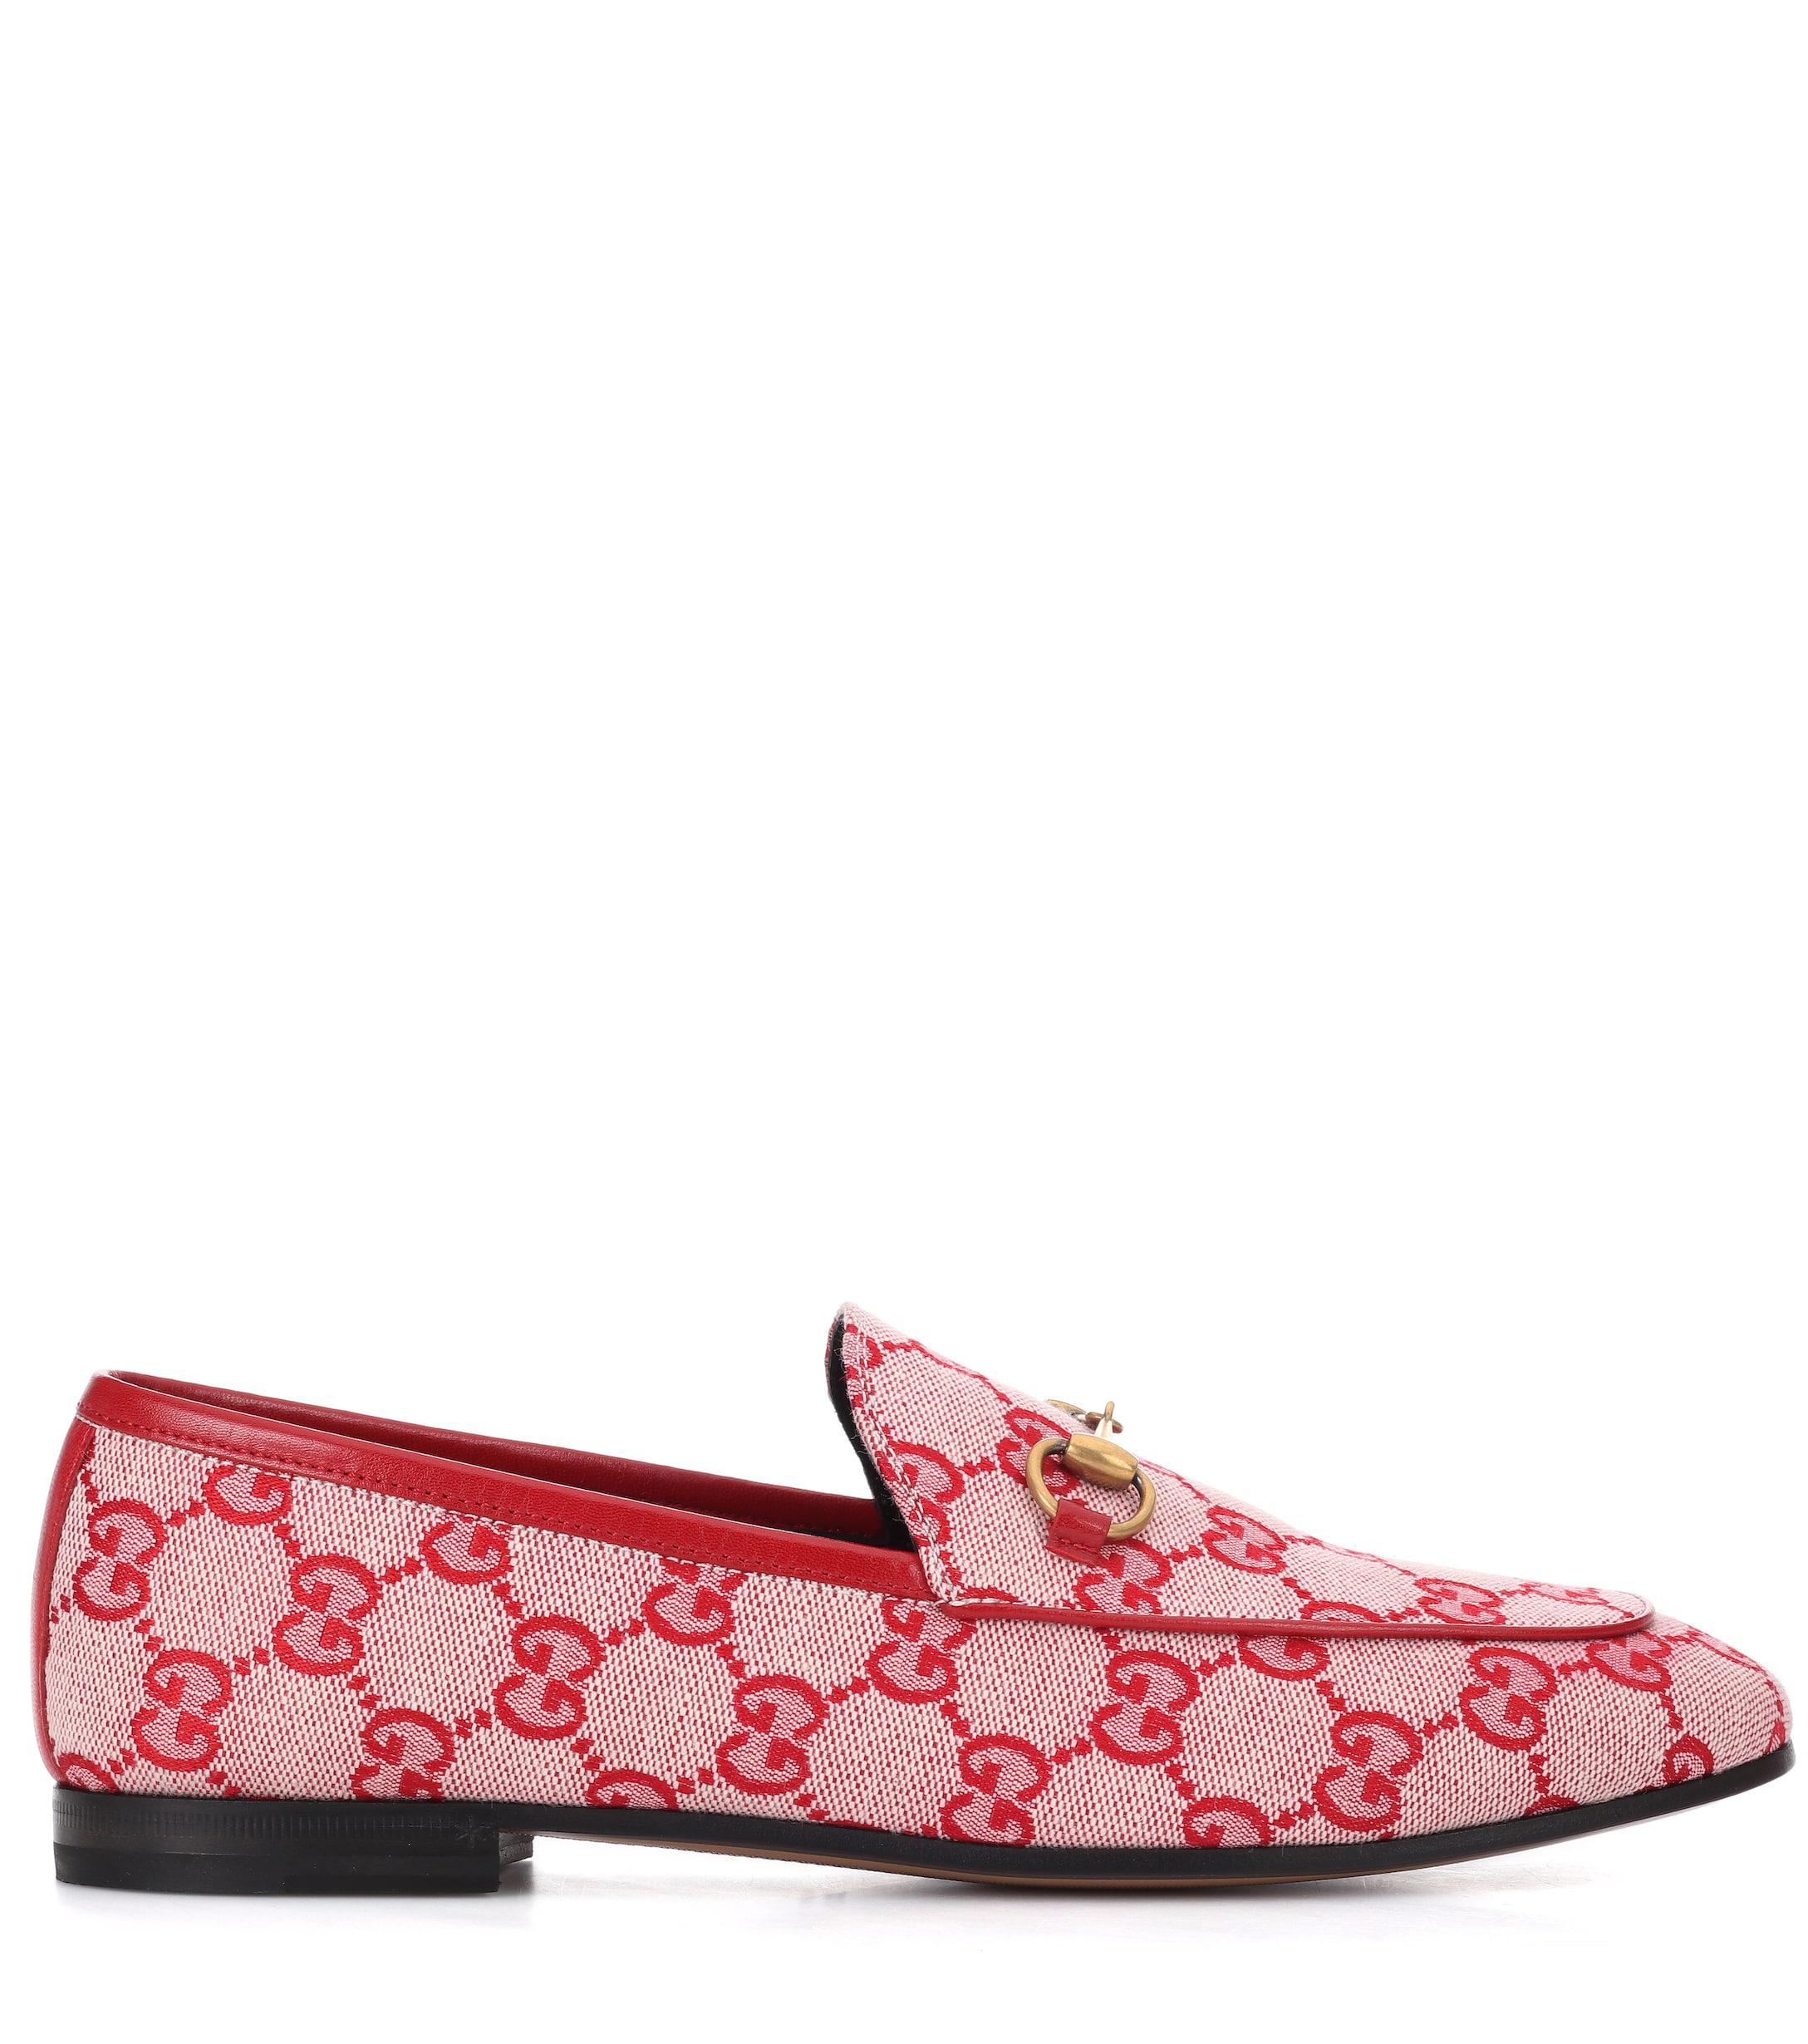 Gucci Jordaan Gg Canvas Loafer in Red - Lyst